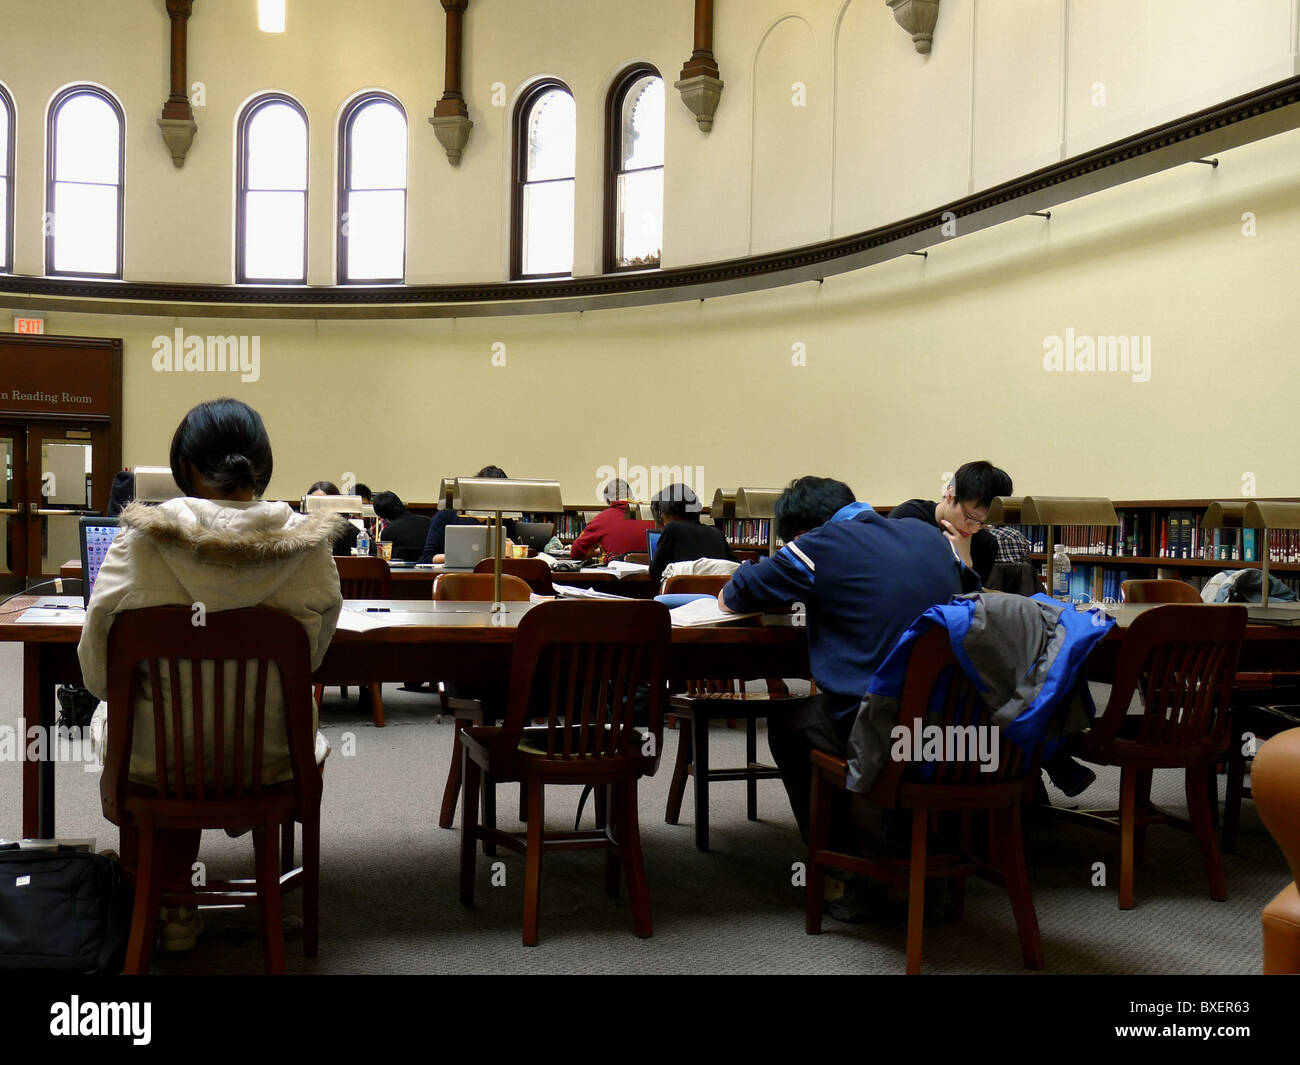 University Reading Room in Old Library Stock Photo